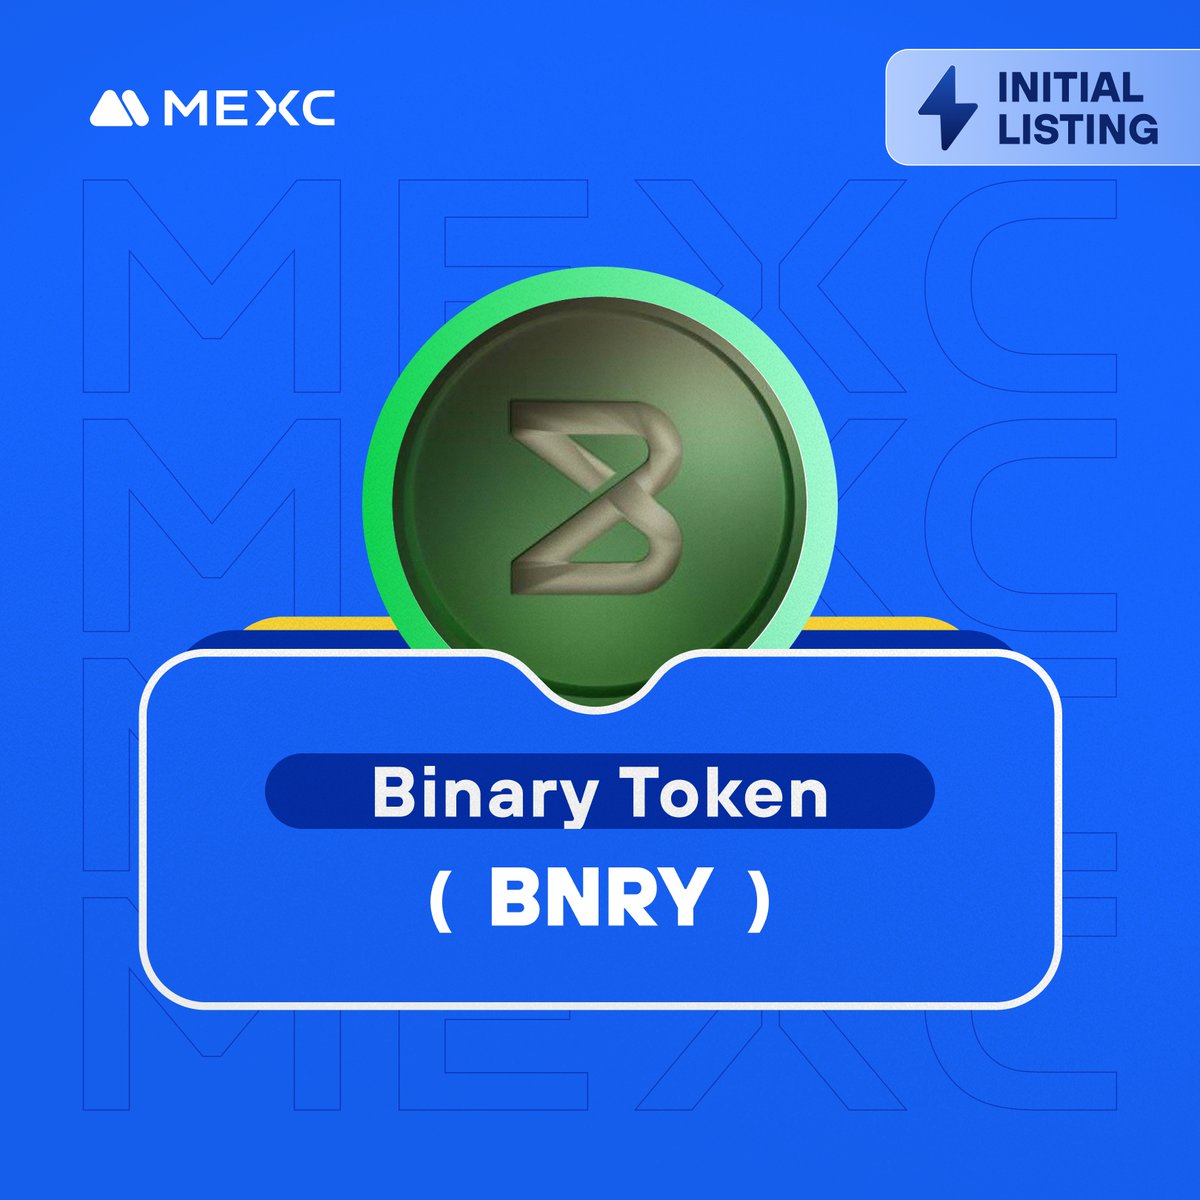 We're thrilled to announce that the @thebinaryhldgs Kickstarter has concluded and $BNRY will be listed on #MEXC! 🔹Deposit: Opened 🔹BNRY/USDT Trading in the Innovation Zone: 2024-04-30 06:00 (UTC) Details: mexc.com/support/articl…